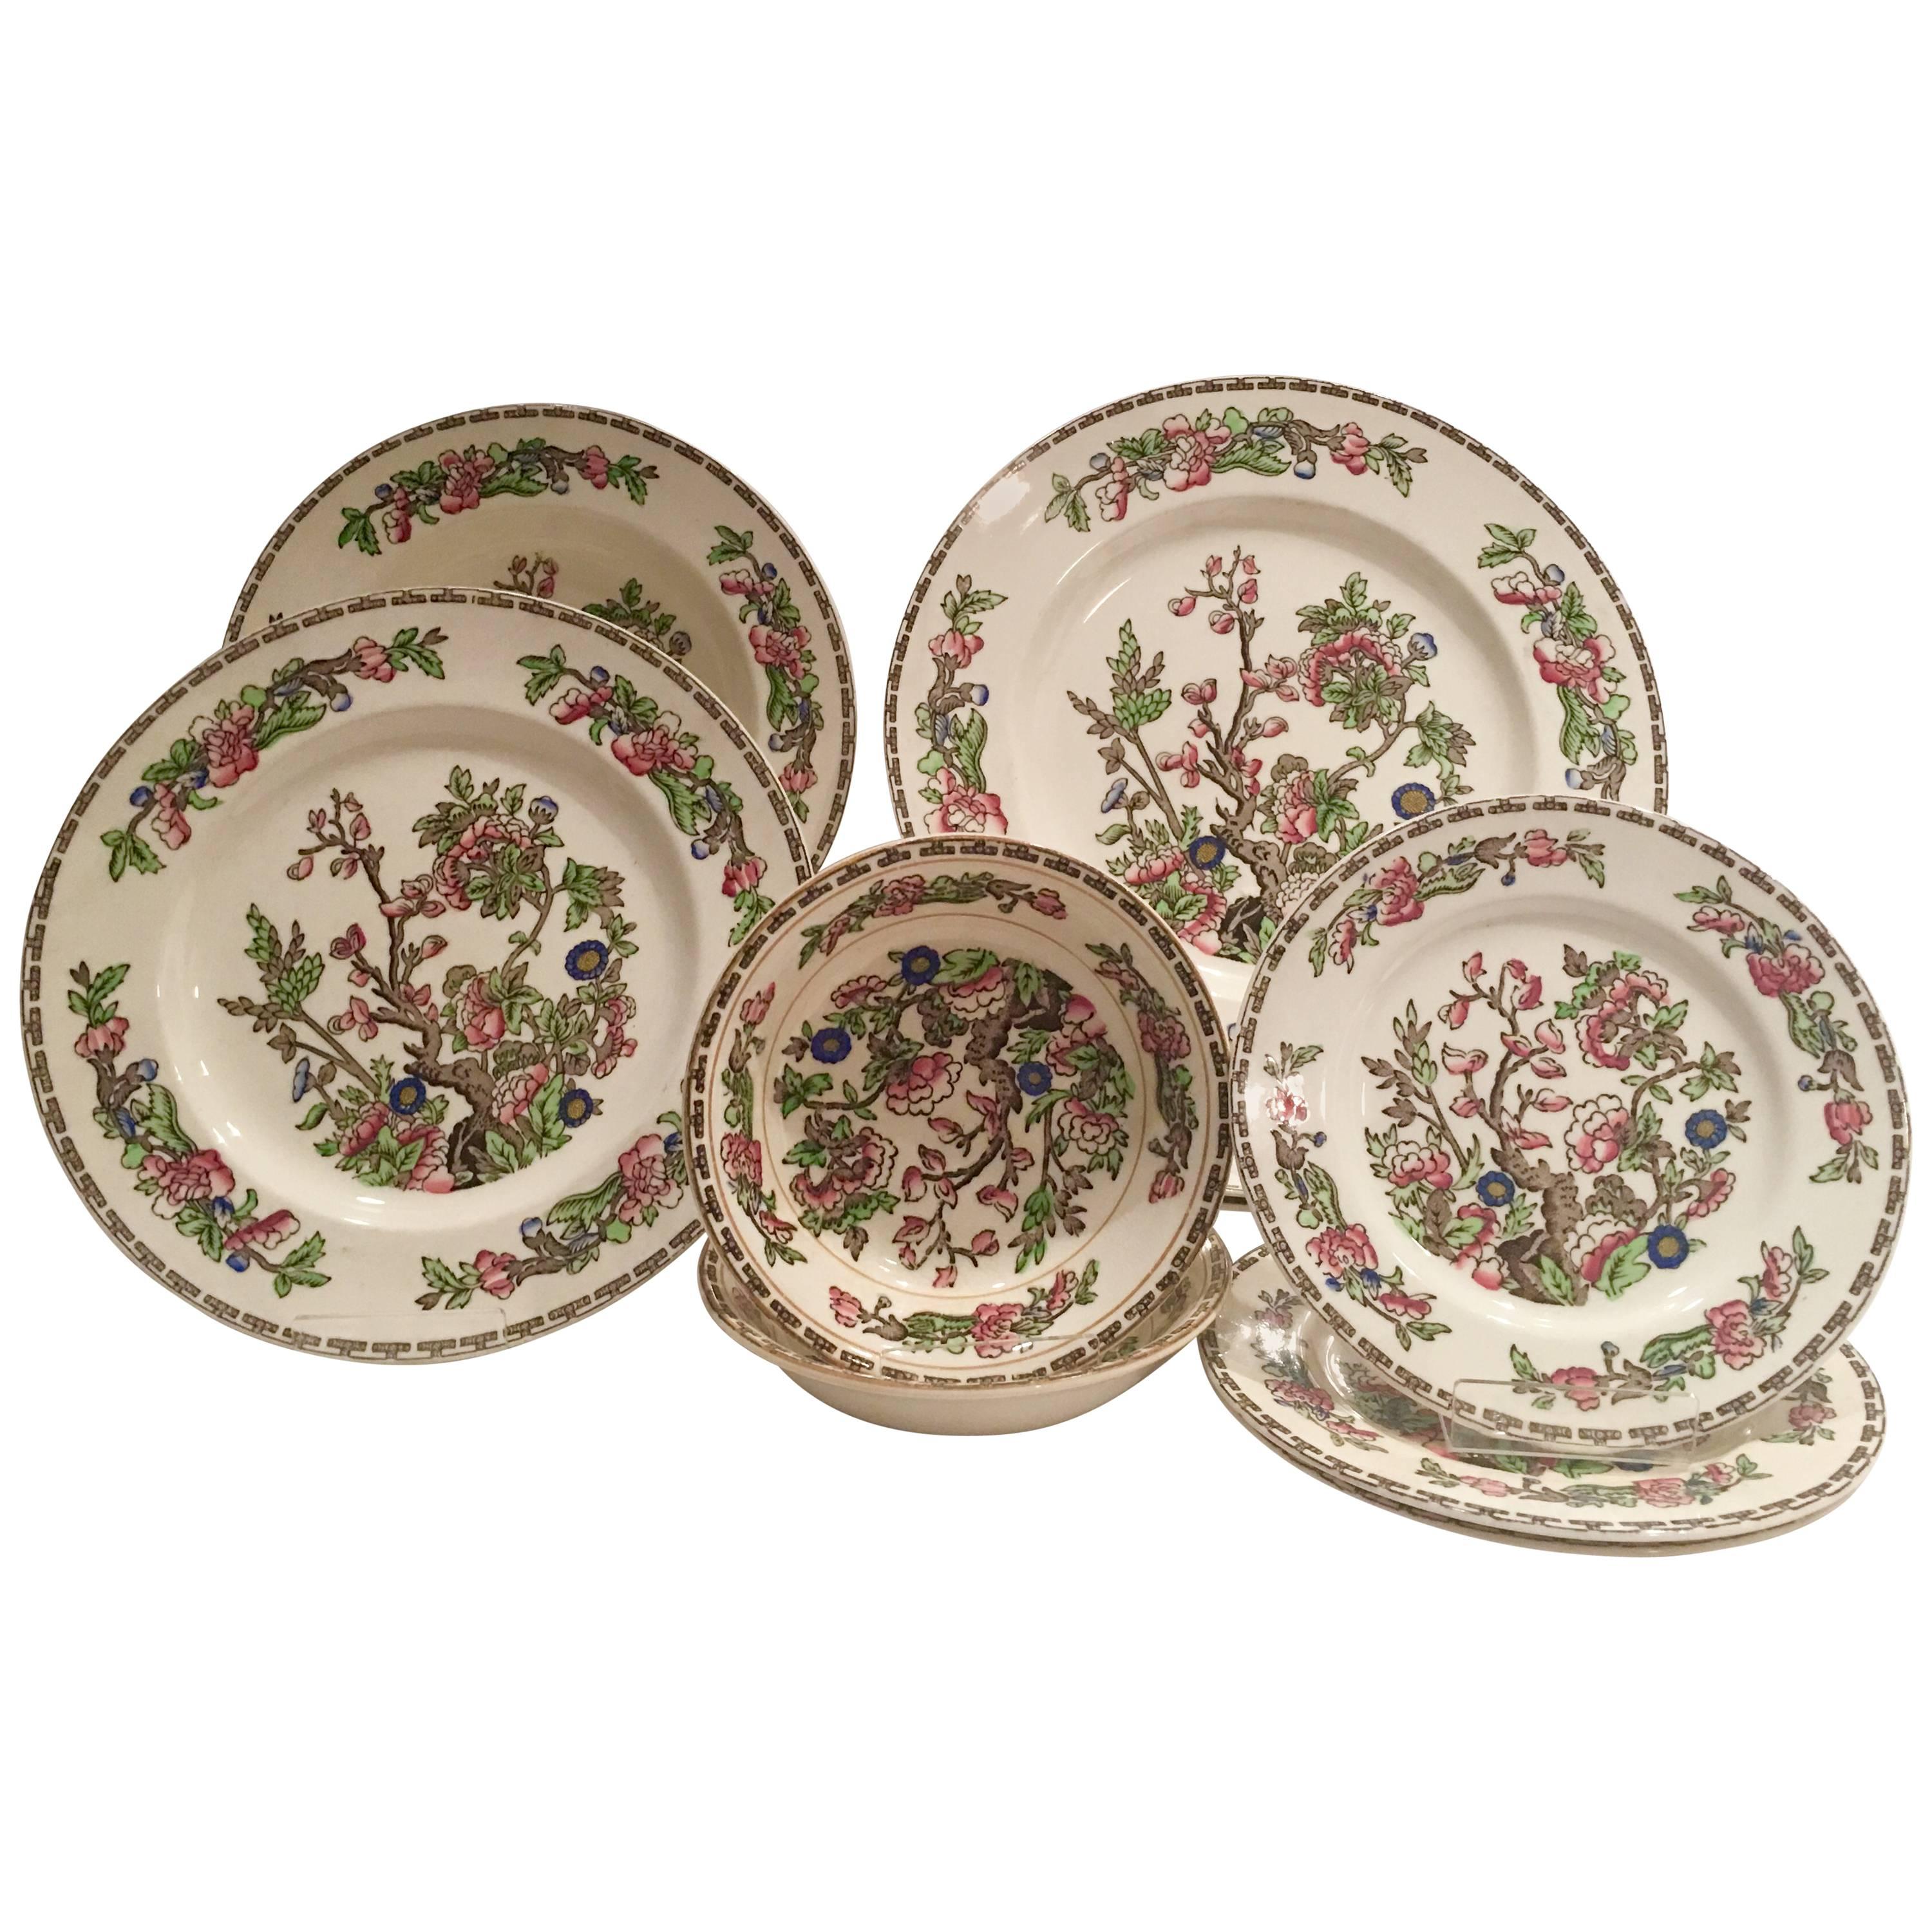 Antique Staffordshire English Dinnerware "The India Tree" By, Alfred Meakin S/14 For Sale